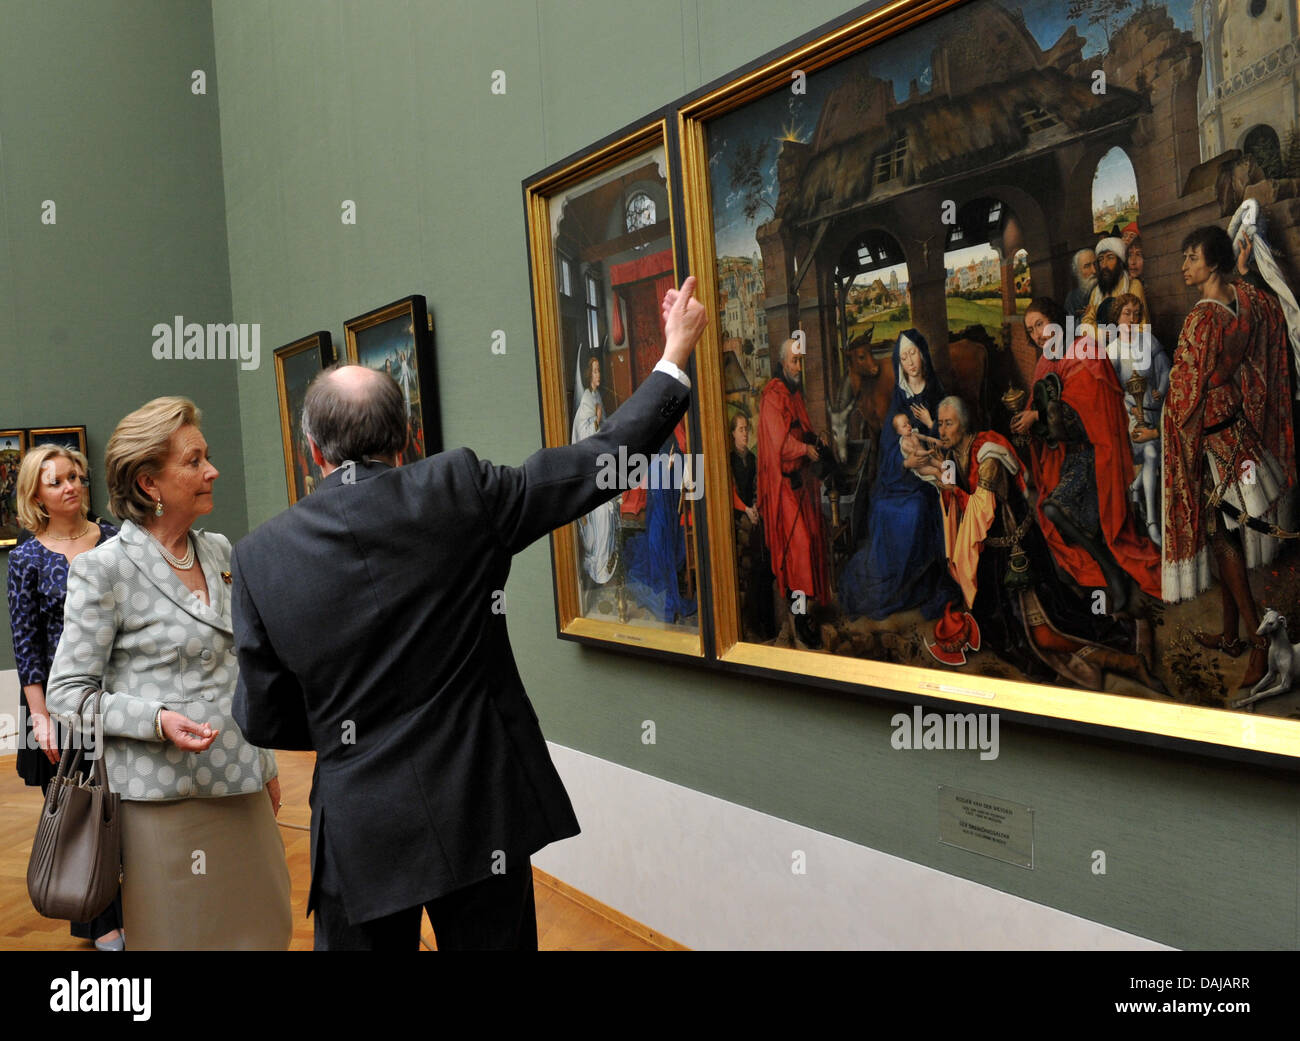 Queen Paola of Belgium (L) looks at the three kings altar by Rogier van der Weyden with the Director of the Bavarian State Collection of Paintings, Martin Schave, in the Alte Pinakothek museum by the curator Miriam Neumeister (R) in Munich, Germany, 30 March 2011. According to statements from German diplomats, the invitation of the Belgian royal couple in meant to show how importan Stock Photo